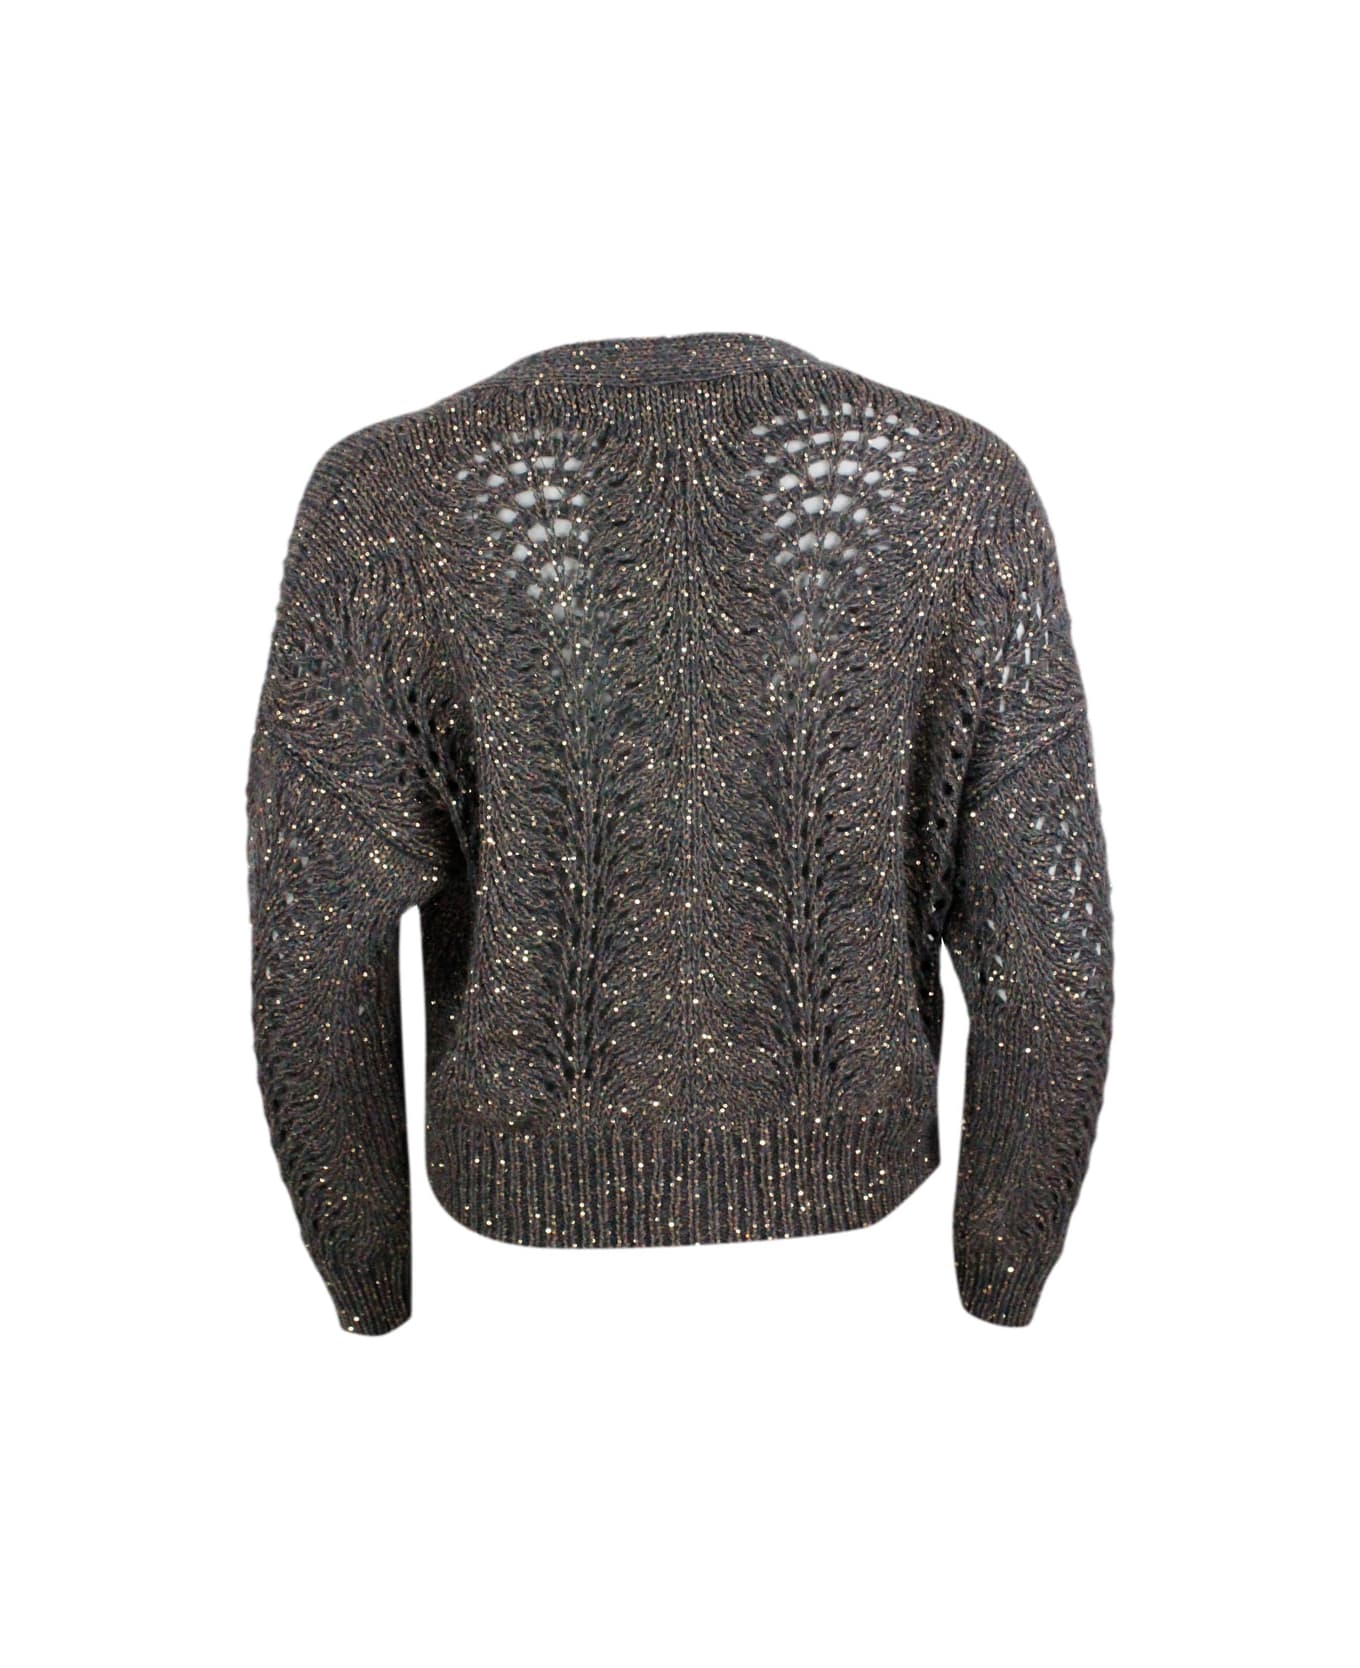 Brunello Cucinelli Cardigan Sweater With Buttons In Precious And Refined Feather Cashmere Embellished With A Dazzling Yarn With Sequins For A Shiny And Three-dimensional - Grey